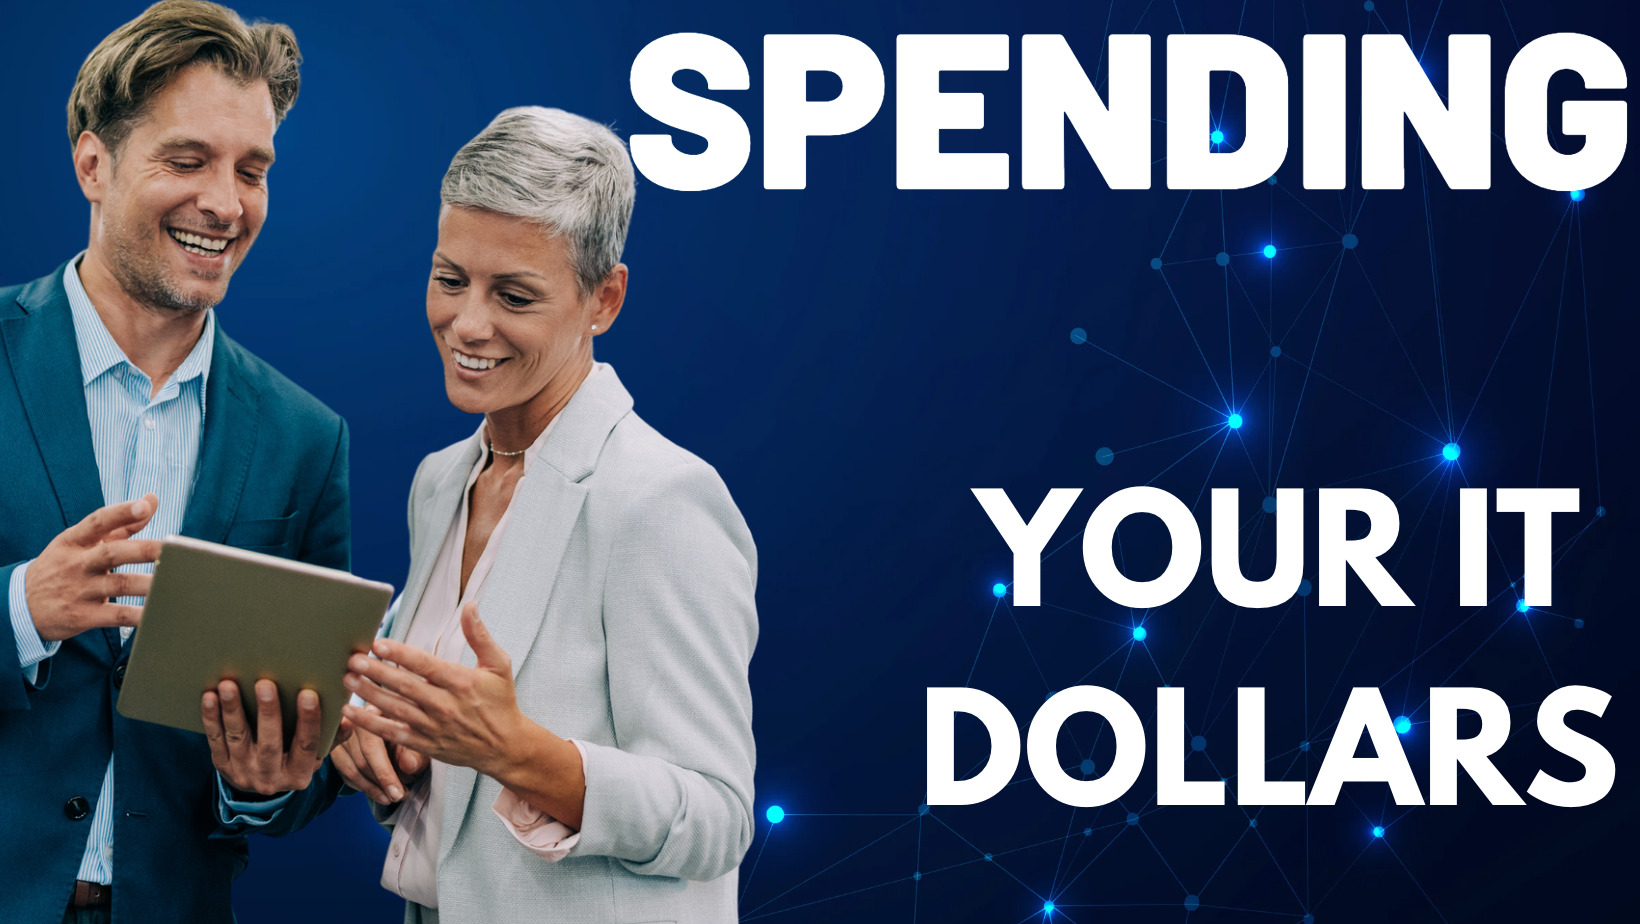 Where Should You Spend Your IT Dollars?